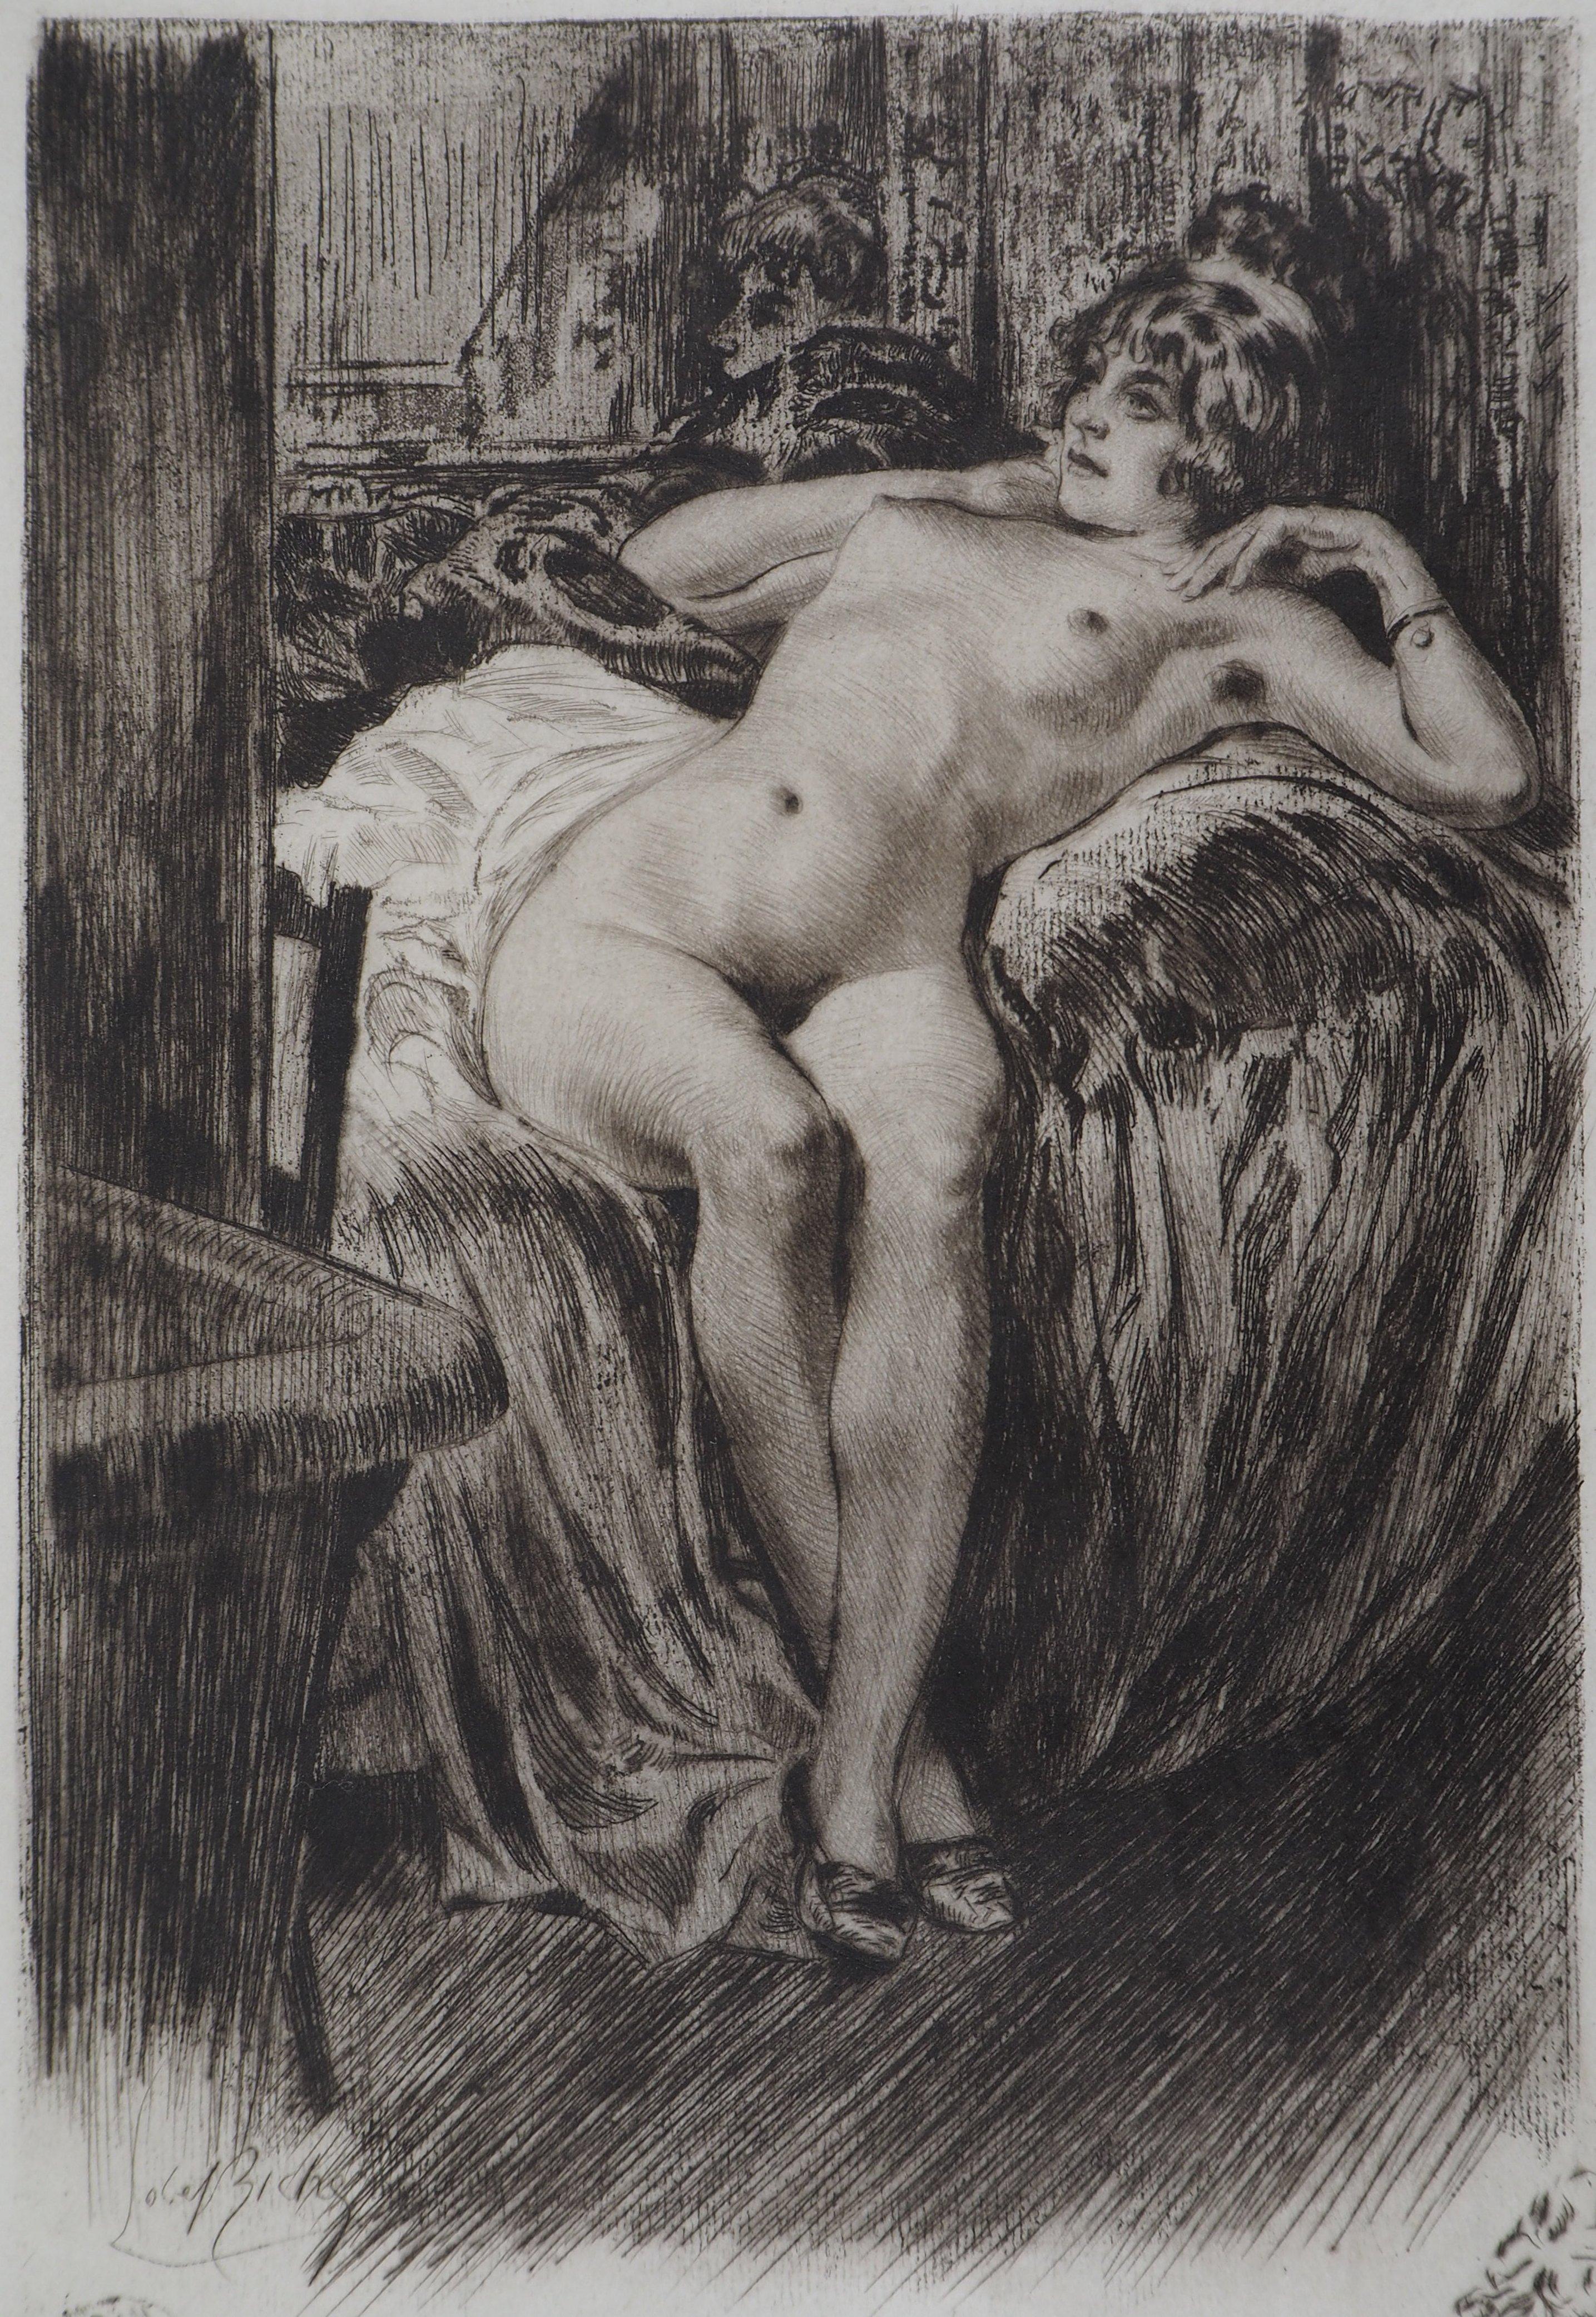 Almery Lobel-Riche Nude Print - Lying Nude on a bed - Original Etching Handsigned 